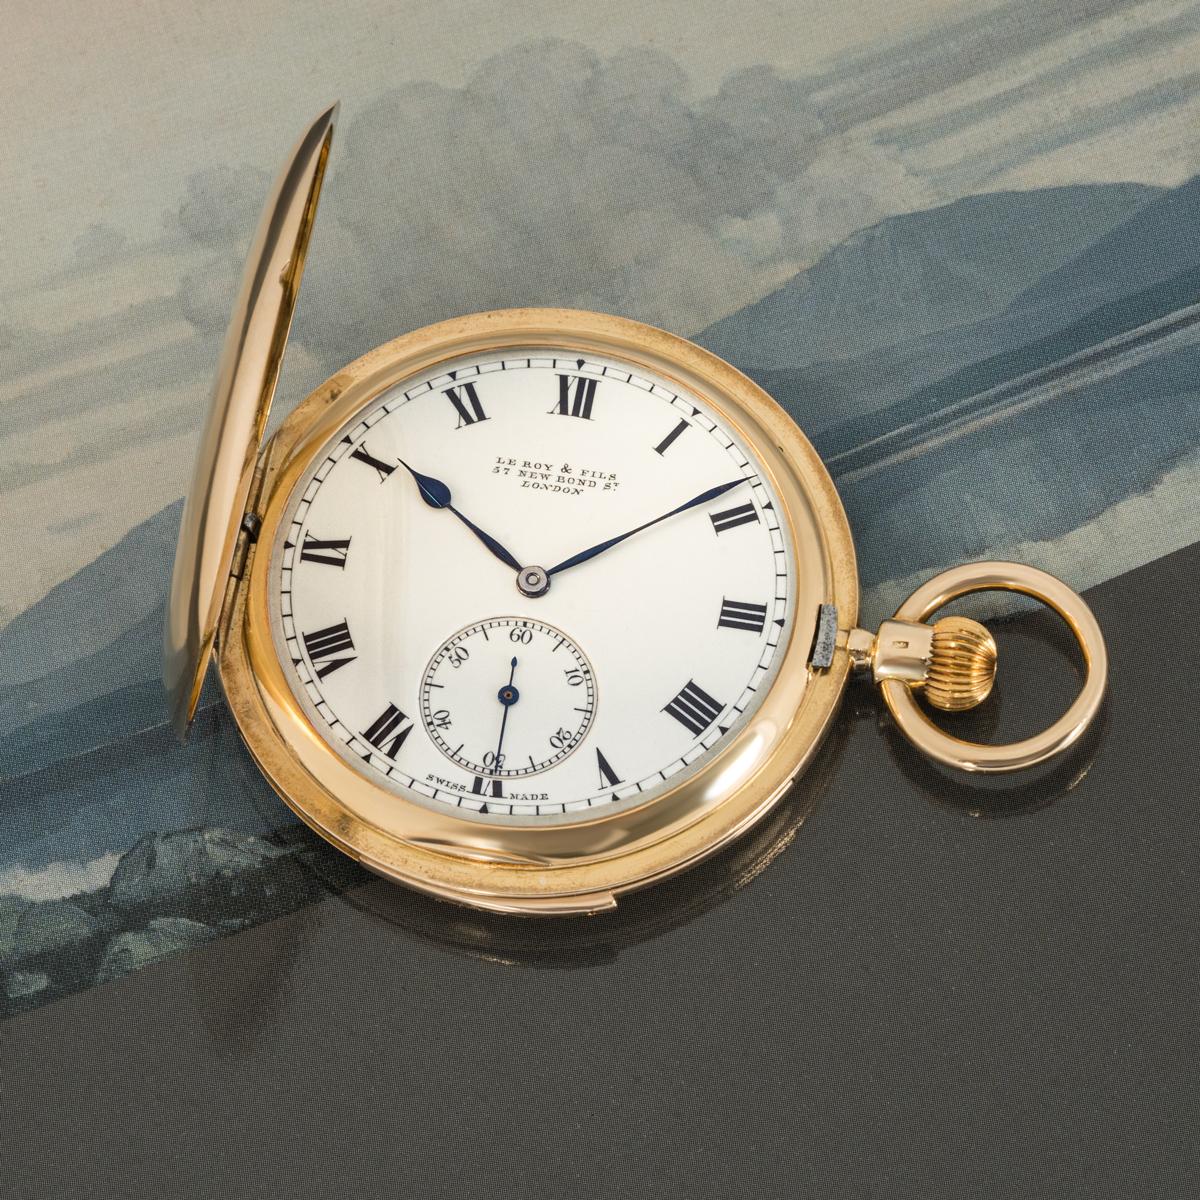 Le Roy & Fils. An 18ct Yellow Gold Full Hunter Keyless Lever Minute Repeater C1900 with an 18ct yellow gold albert ( 25grm )

Dial: The beautiful enamel dial signed Le Roy & Fils 57 New Bond Street London with Roman numerals outer minute track and